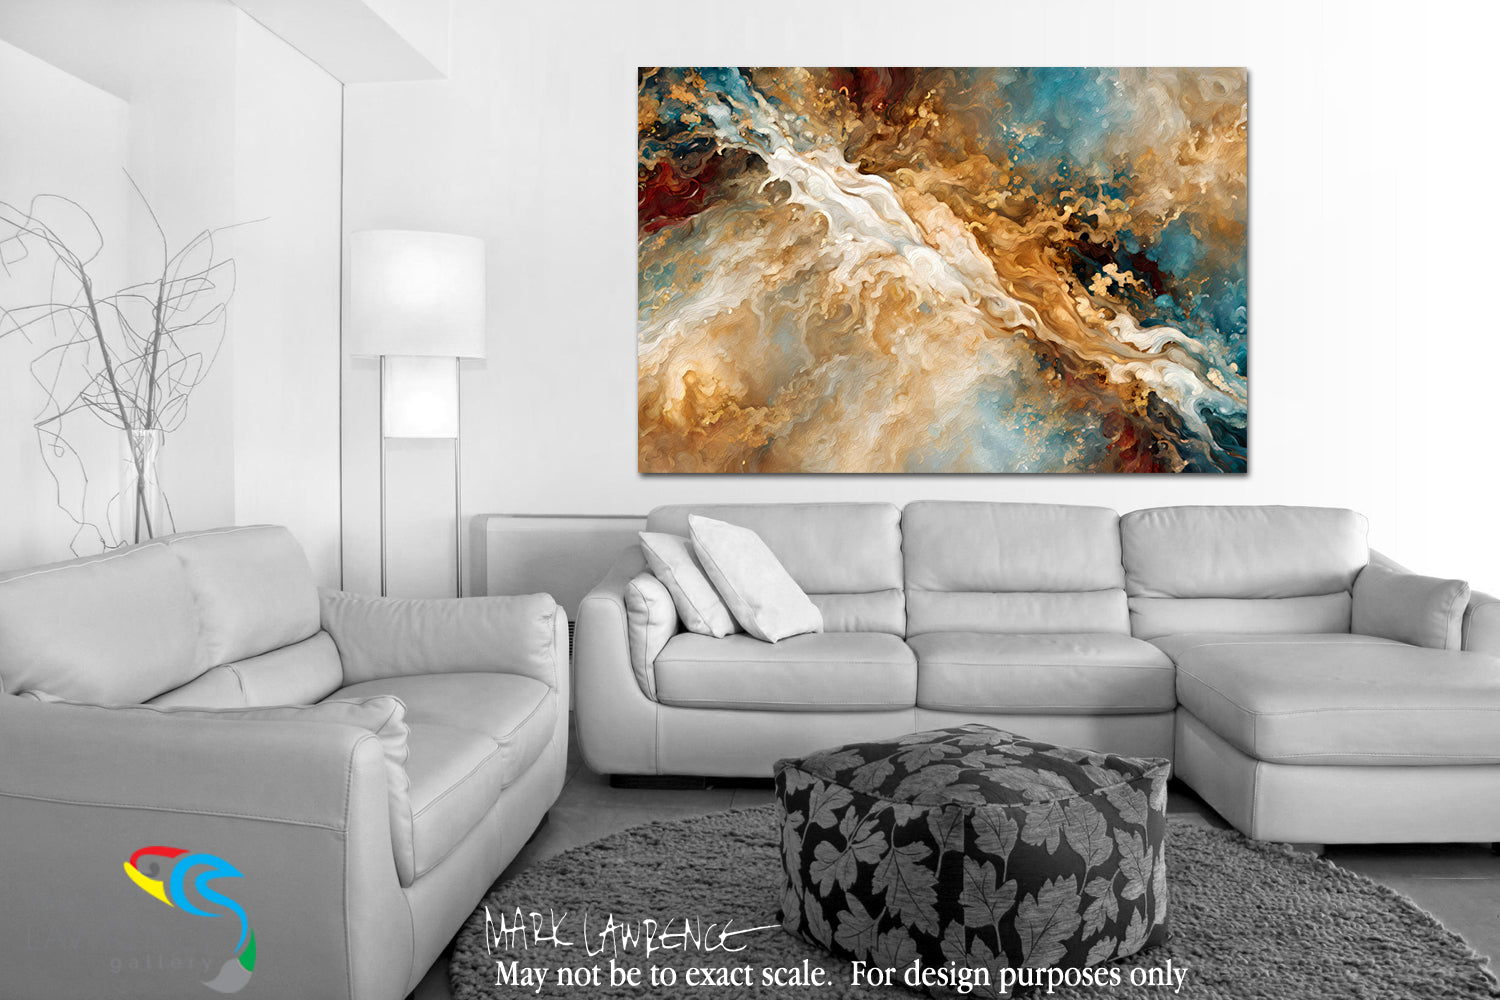 Interior Design Inspiration- Genesis 28:12. Heaven's Gate. Limited Edition Christian Modern Art. Hand embellished & textured giclee paintings with bold brush strokes by the artist. Signed & numbered. Museum quality on canvas wall art prints. Take heart, for like Jacob who saw a stairway to heaven in his time of need.